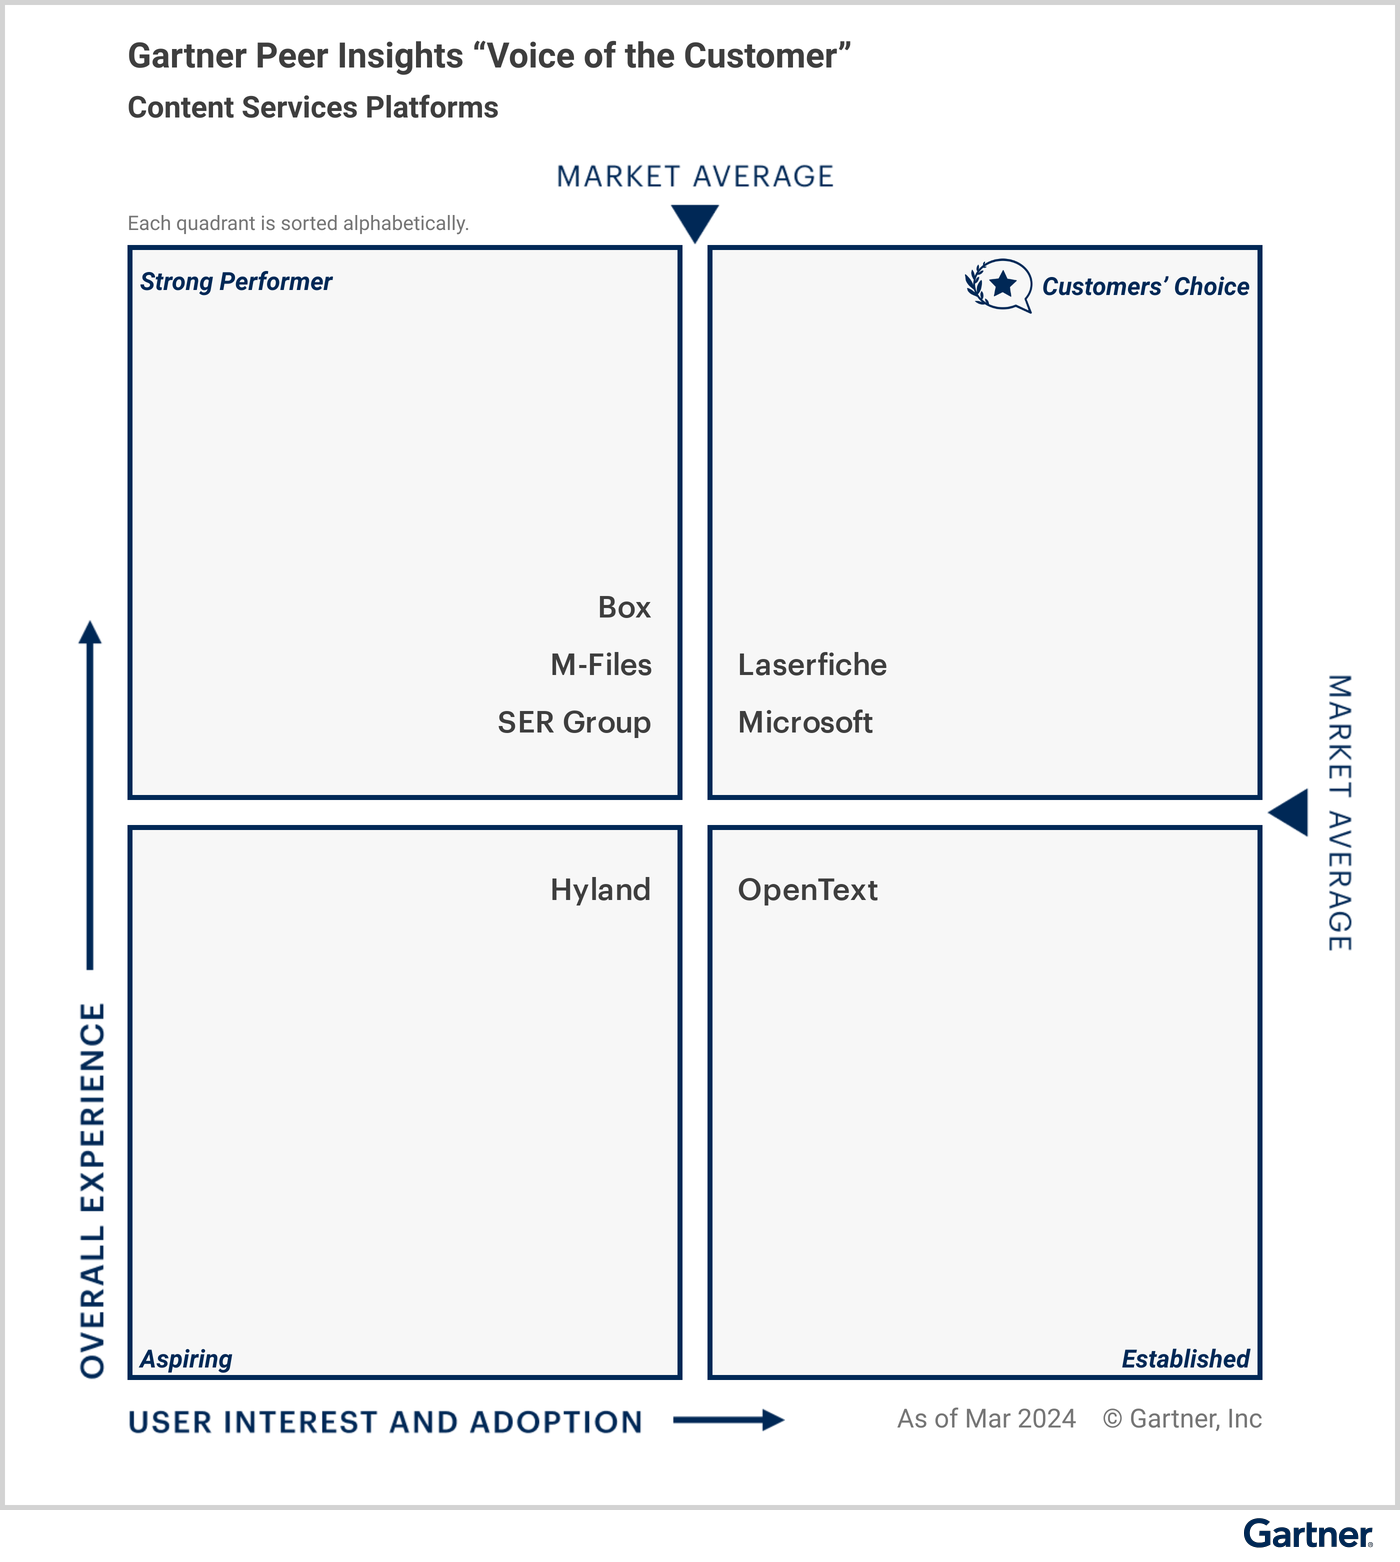 Figure_1_Voice_of_the_Customer_for_Content_Services_Platforms